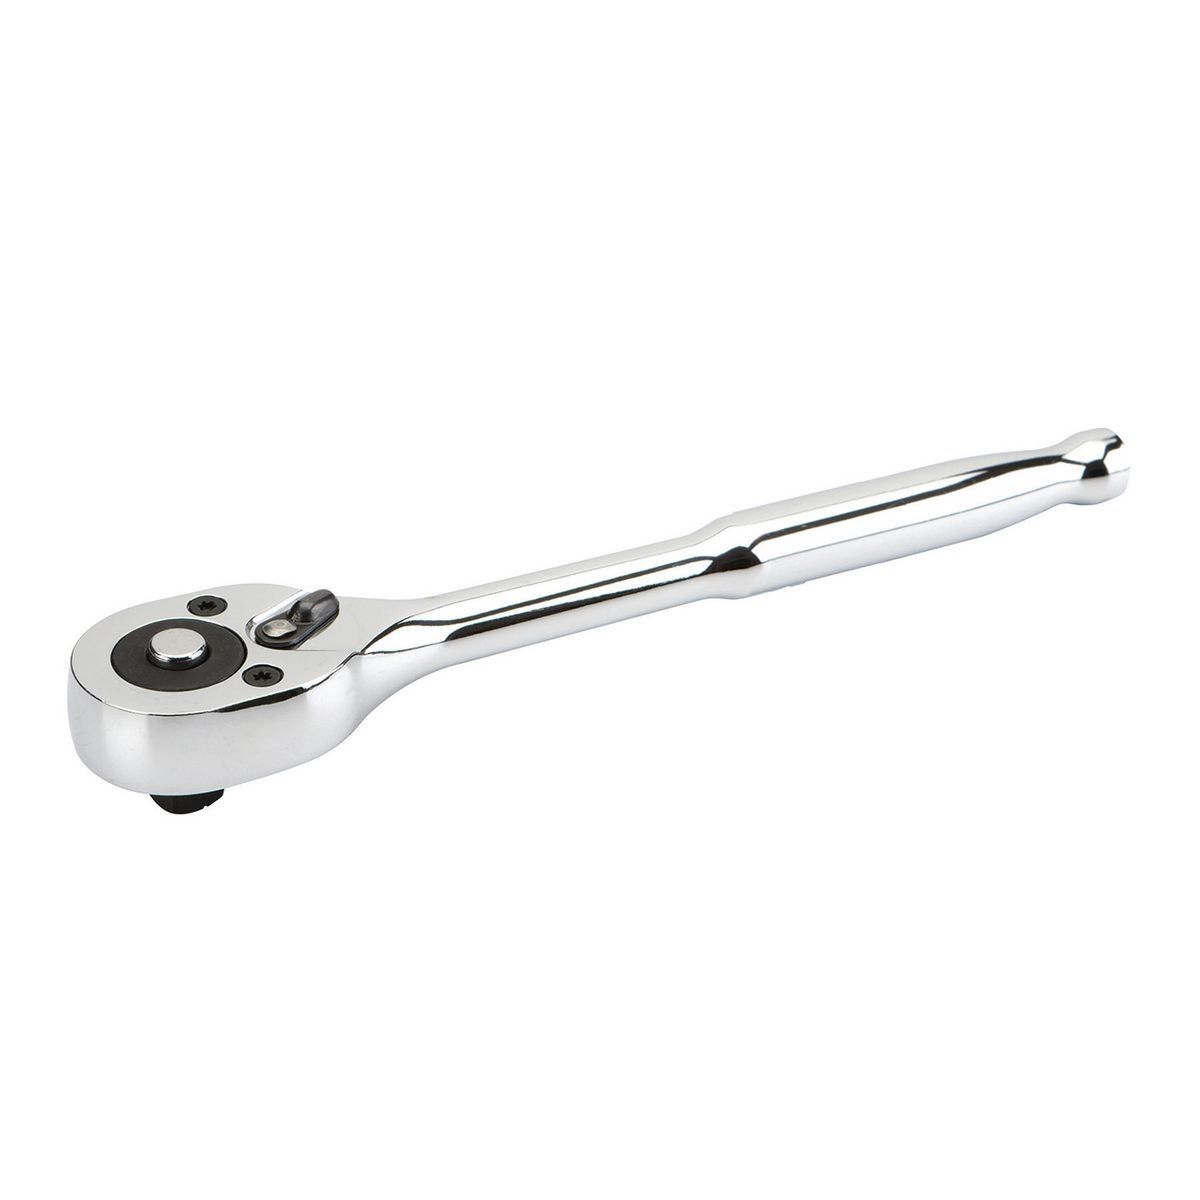 PITTSBURGH PRO 3/8 in. Drive Quick Release Ratchet